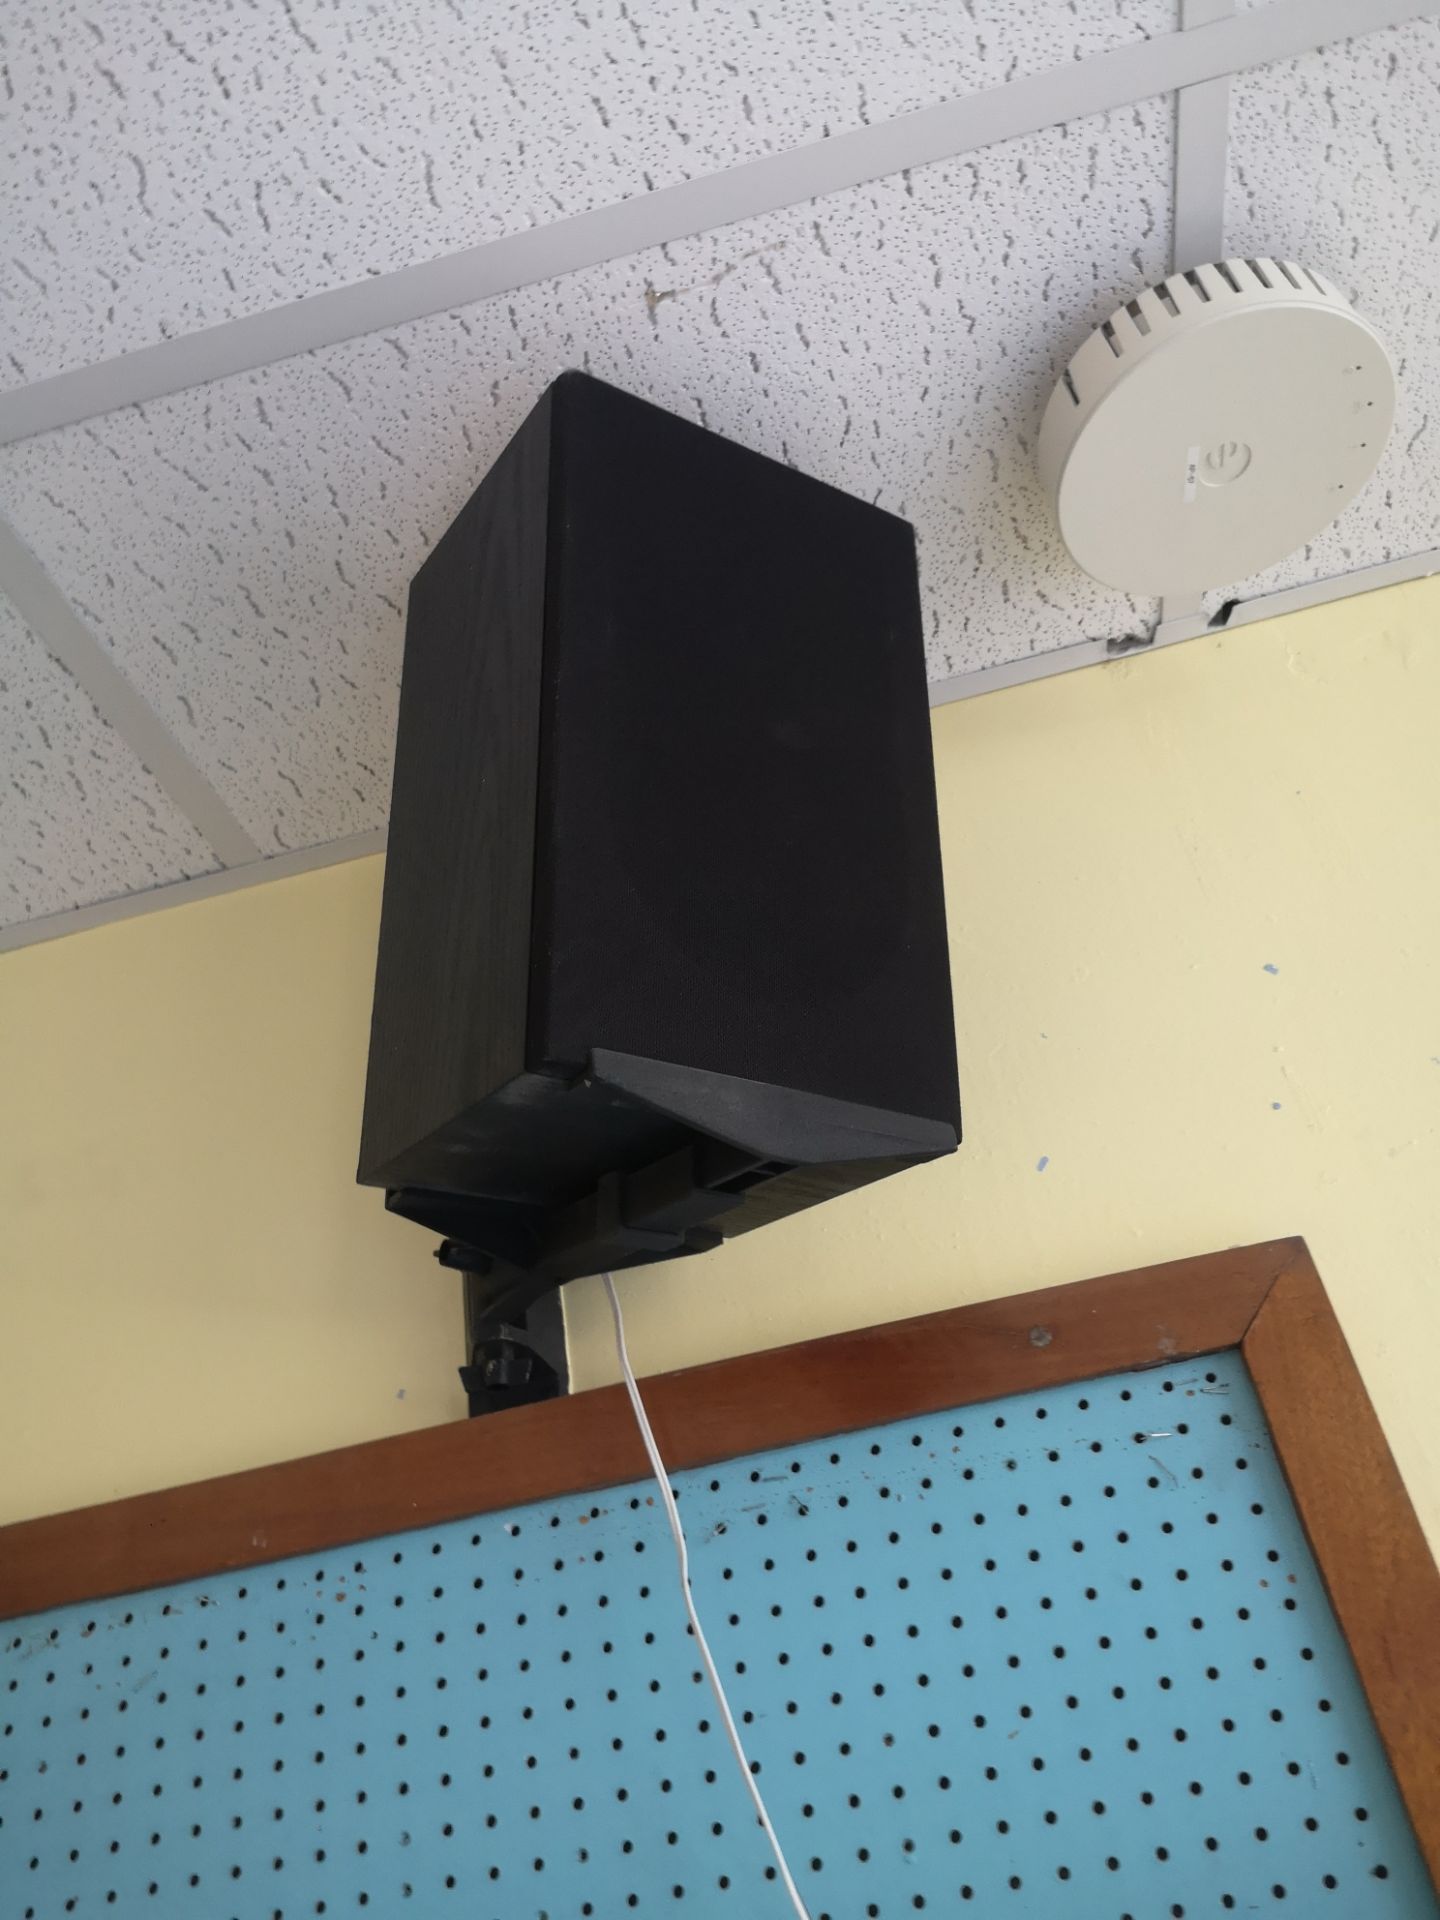 Pair of AR black speakers with wall mounts - Image 2 of 2